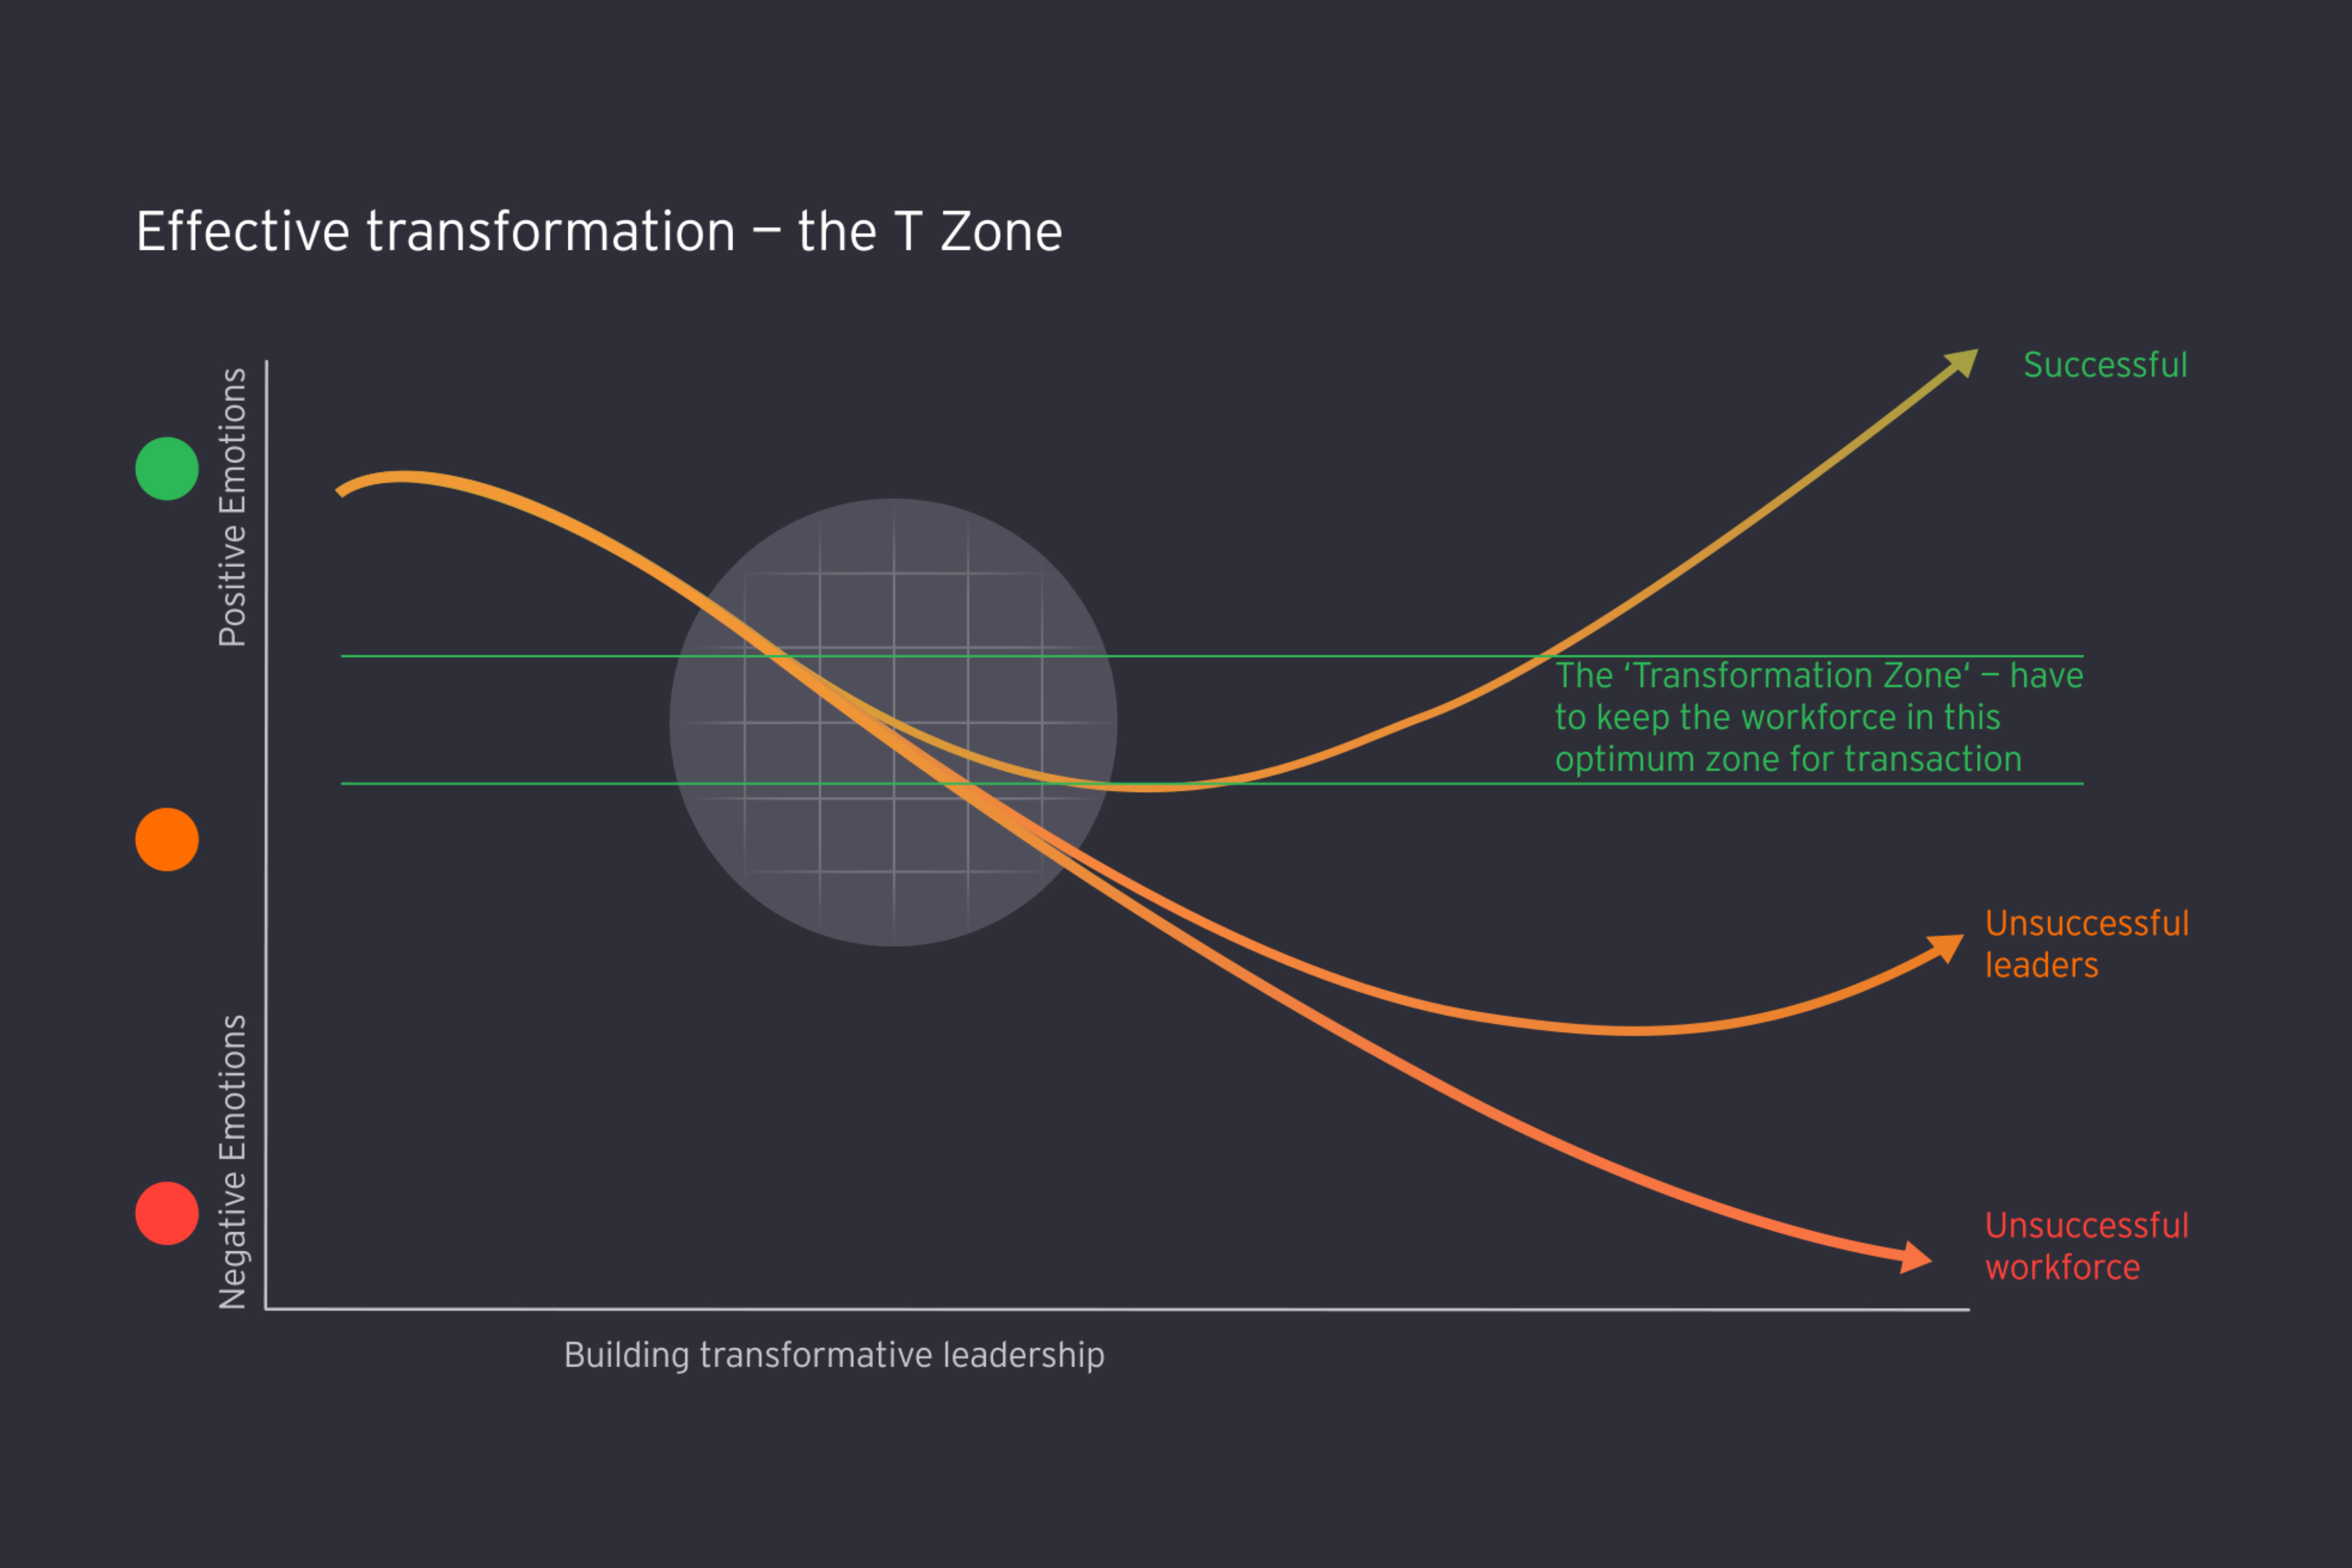 Effective transformation - the T Zone